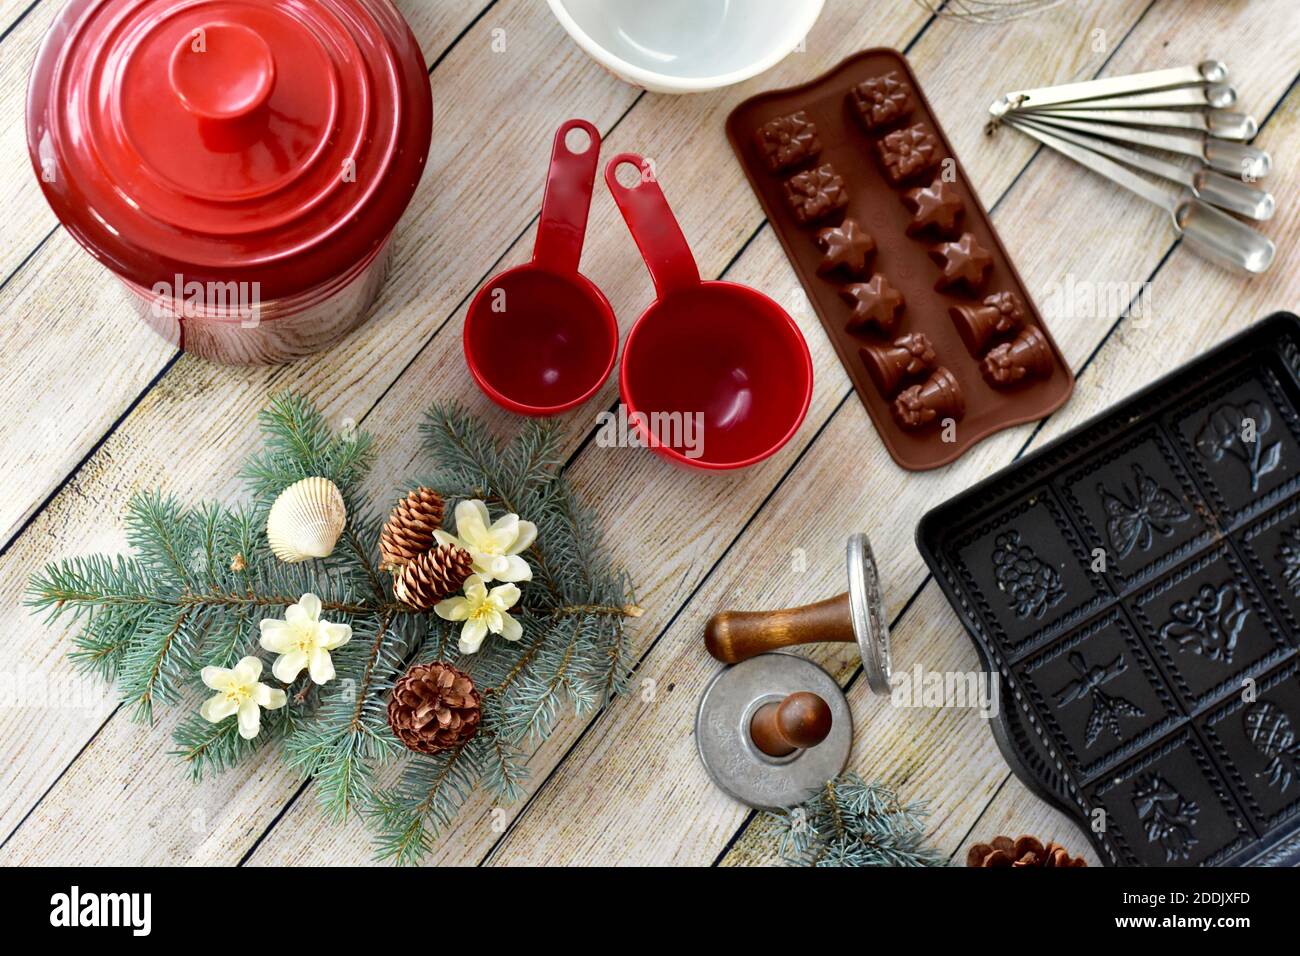 https://c8.alamy.com/comp/2DDJXFD/festive-holiday-seasonal-cookie-and-baking-equipment-and-supplies-to-make-delicious-gourmet-christmas-season-treats-and-gifts-for-friends-and-family-2DDJXFD.jpg